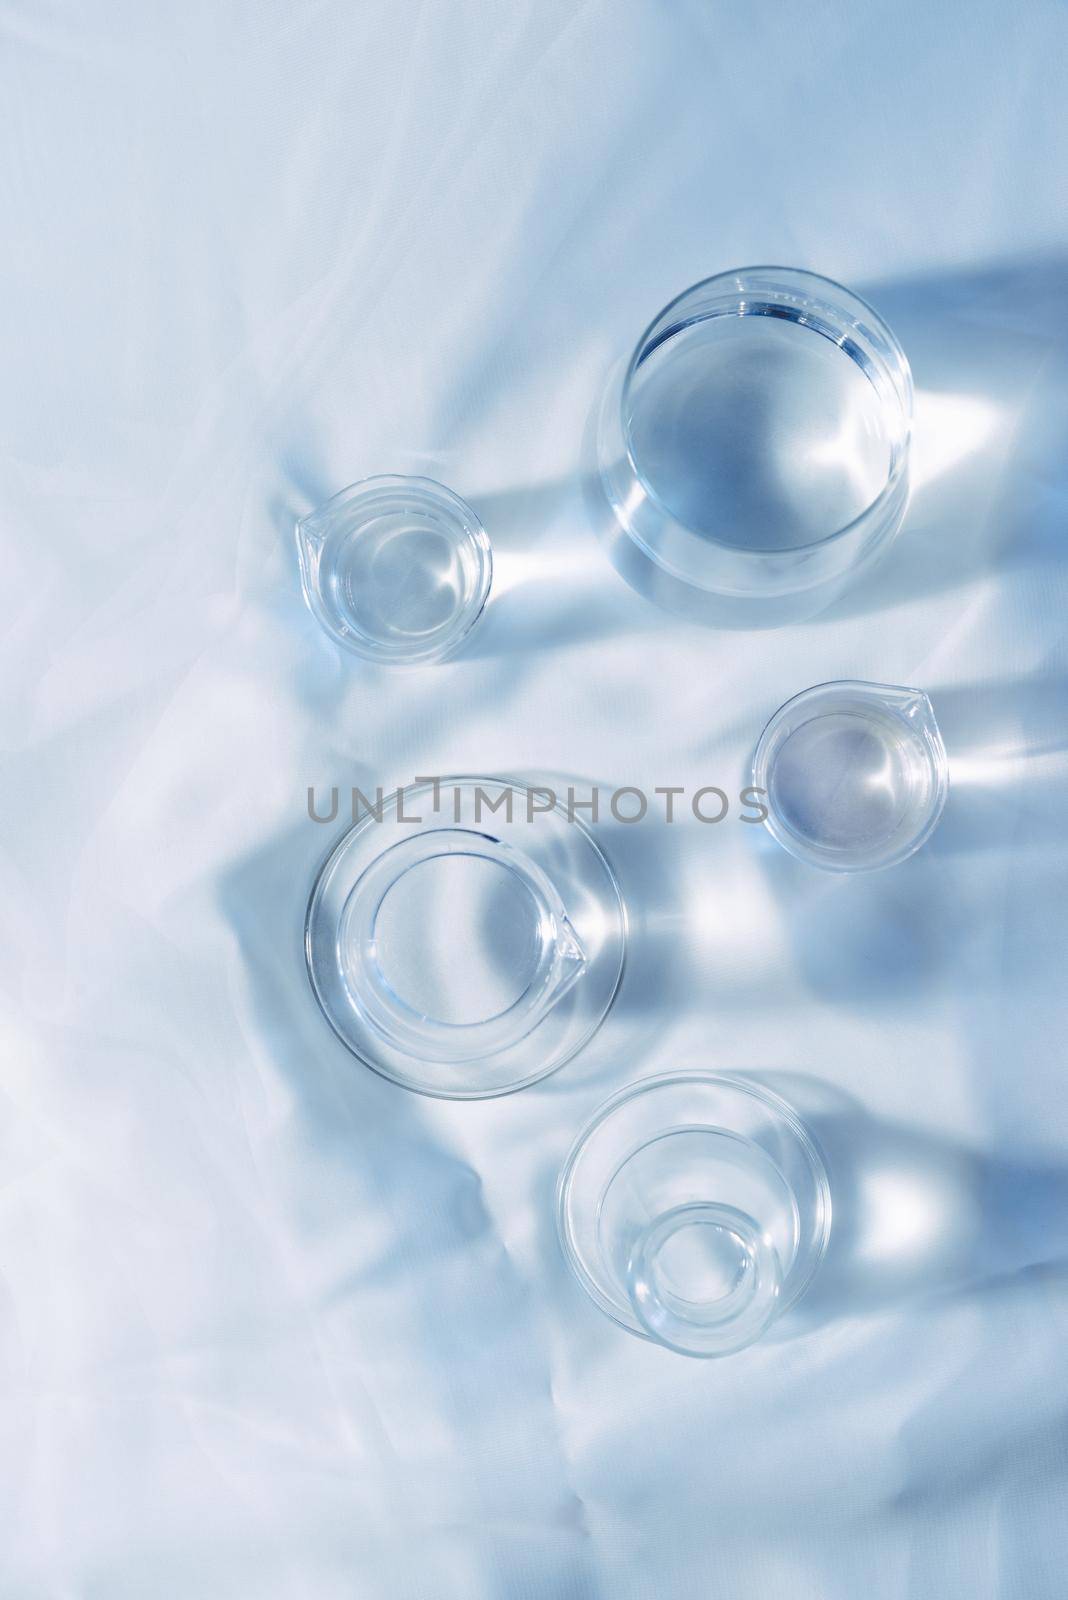 Scientific Glassware For Chemical, Laboratory Research by makidotvn